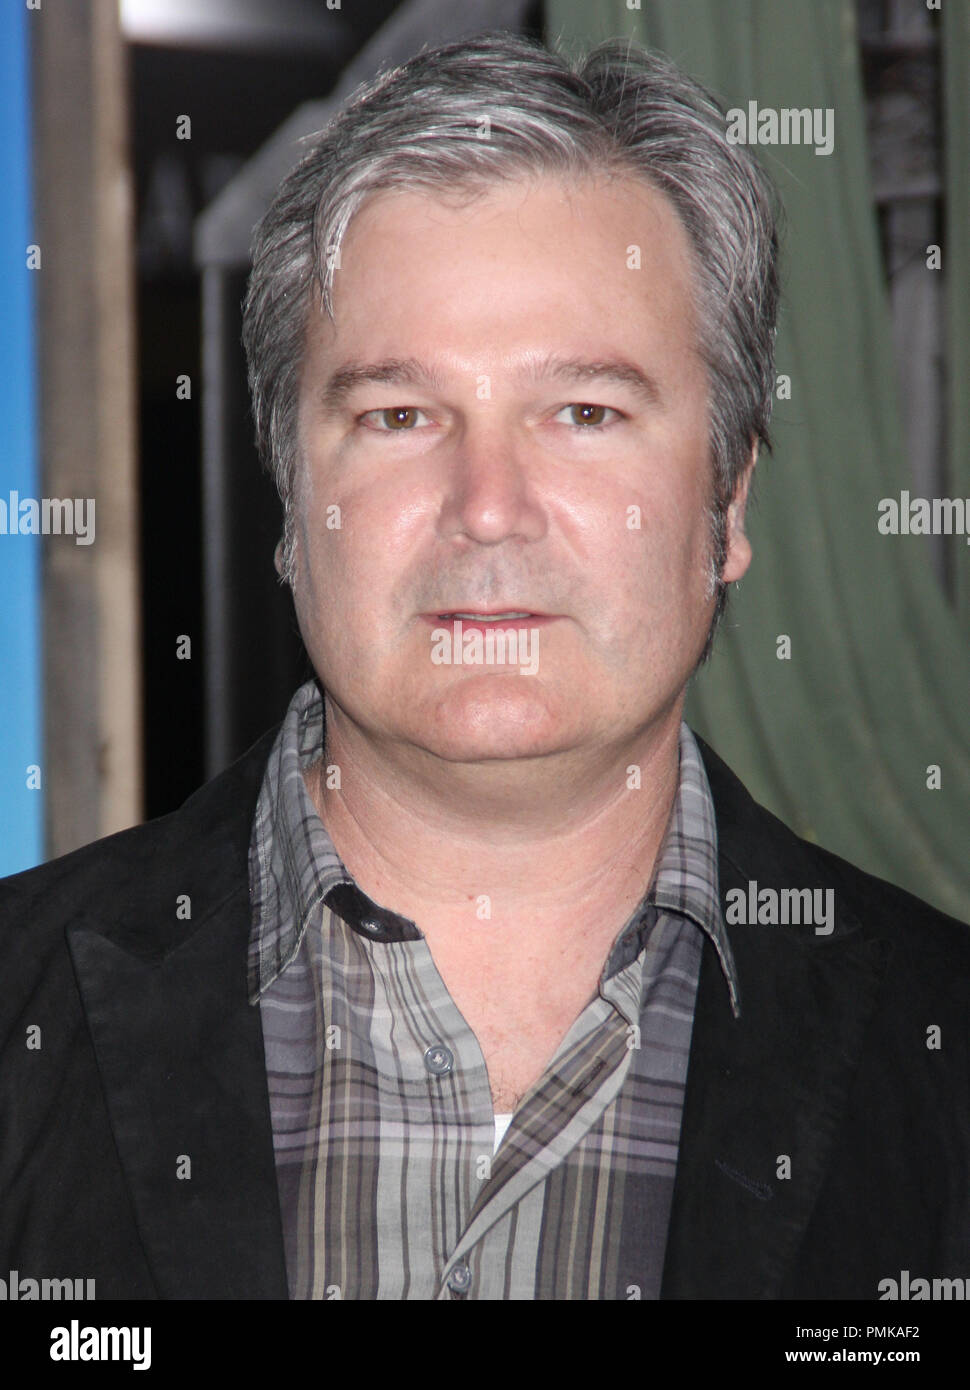 Gore Verbinski at the Los Angeles Premiere of RANGO held at the Regency Village Theatre in Los Angeles' Westwood area, CA on Monday, February 14, 2011. Photo by Pedro Ulayan Pacific Rim Photos / PictureLux Stock Photo